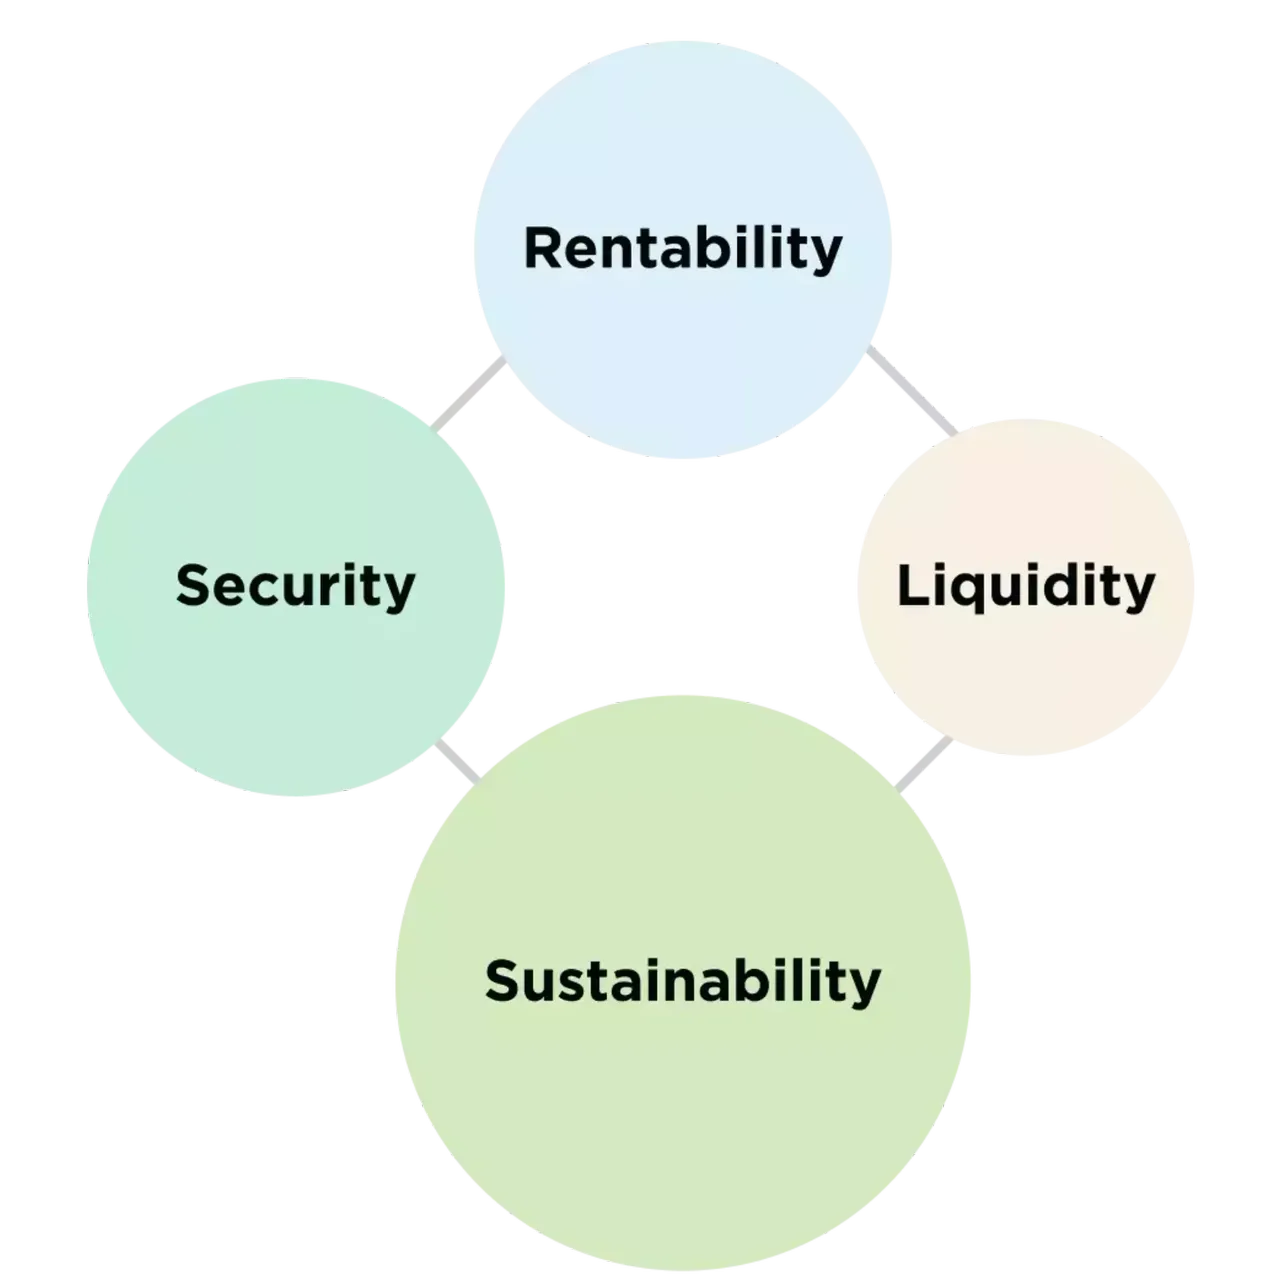 Four dimensions of sustainable investment